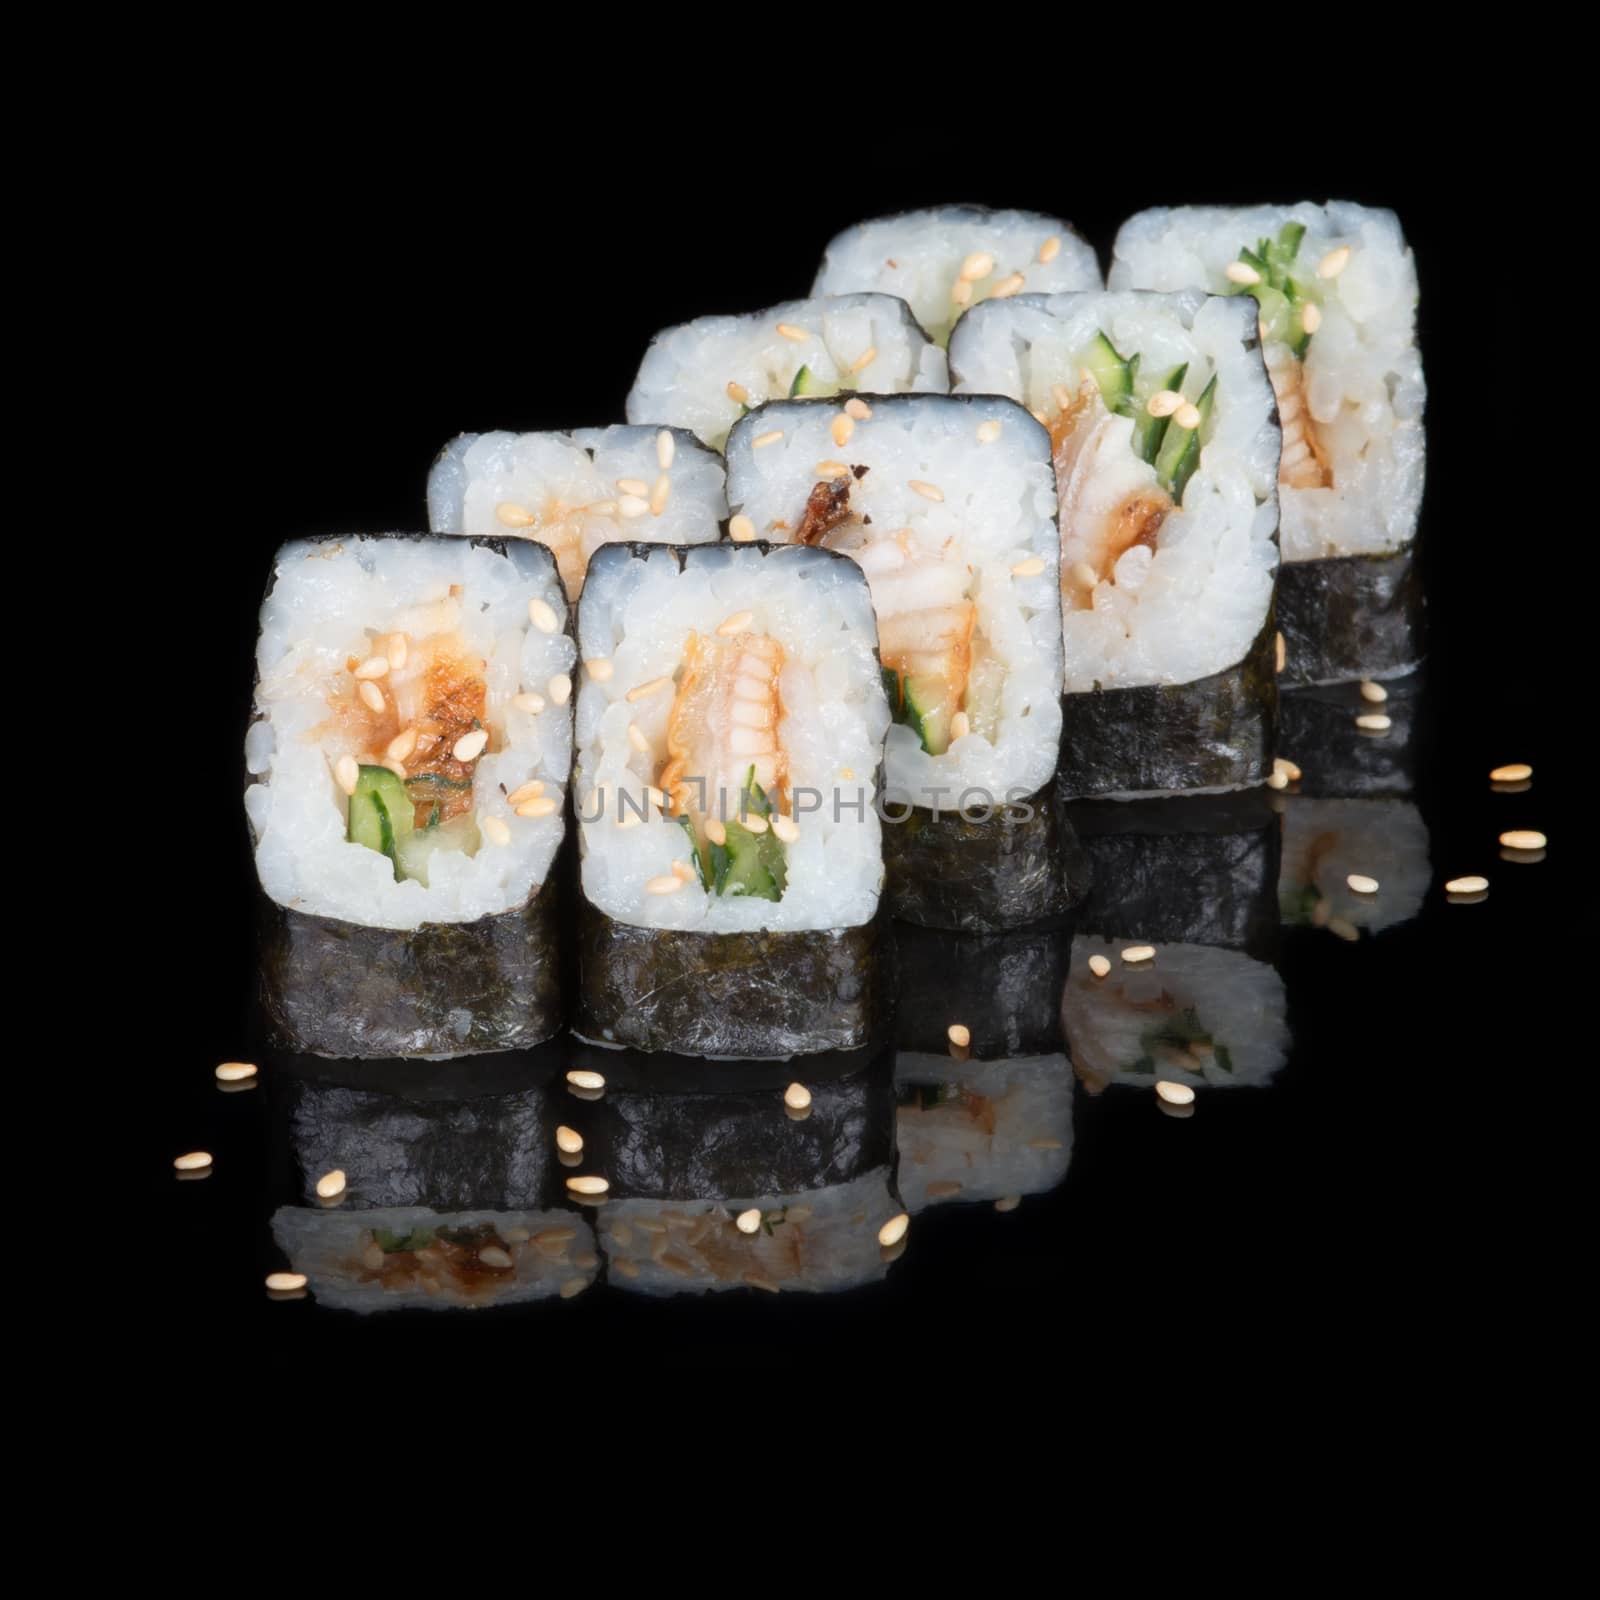 Sushi rolls with eel and cucumber by kzen